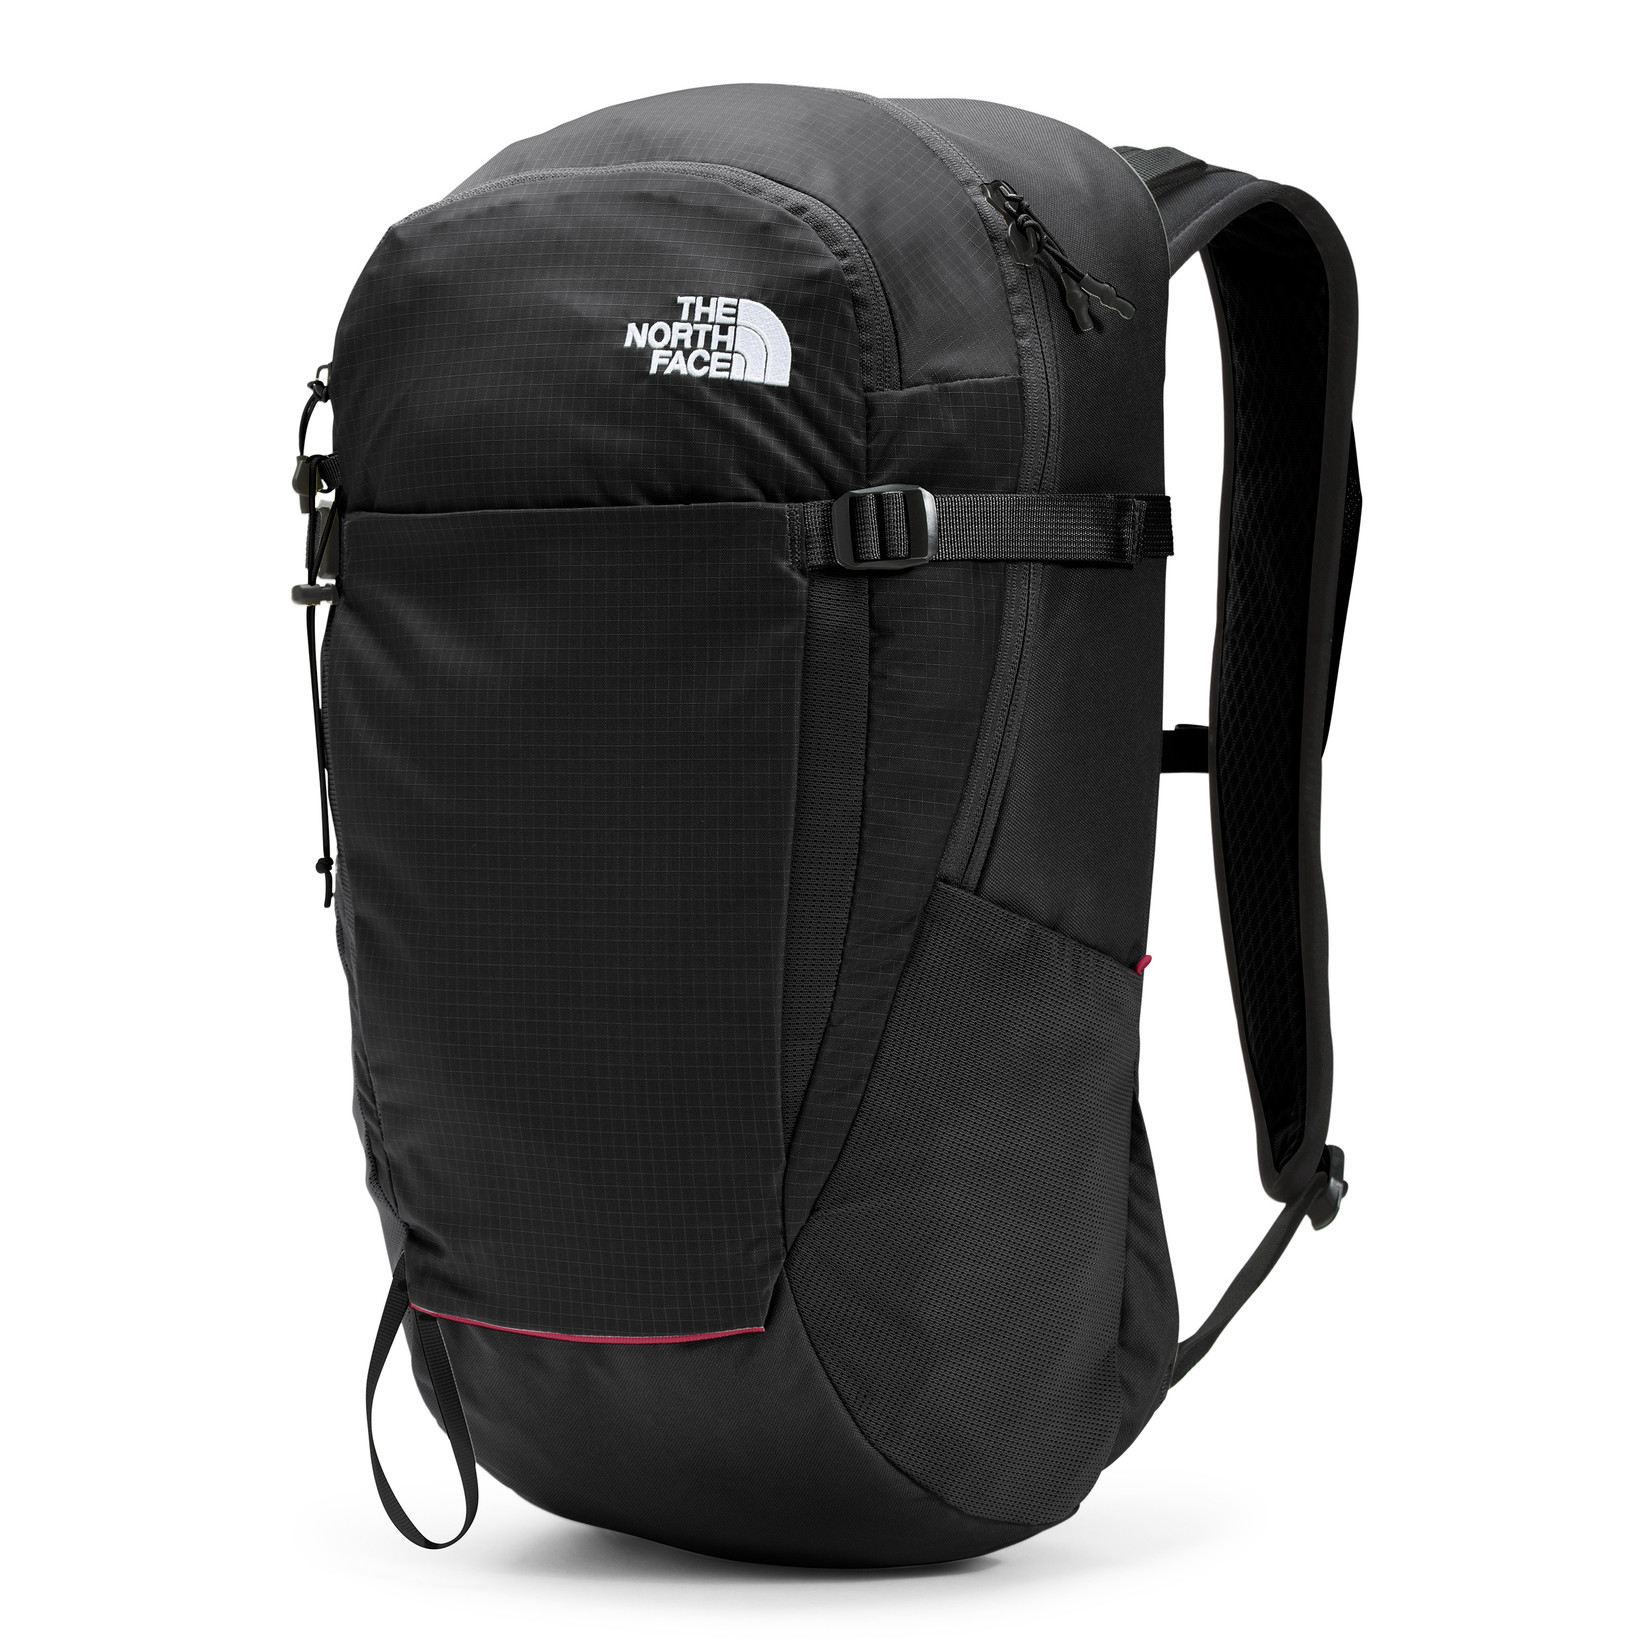 The North Face The North Face Basin 24 Daypack